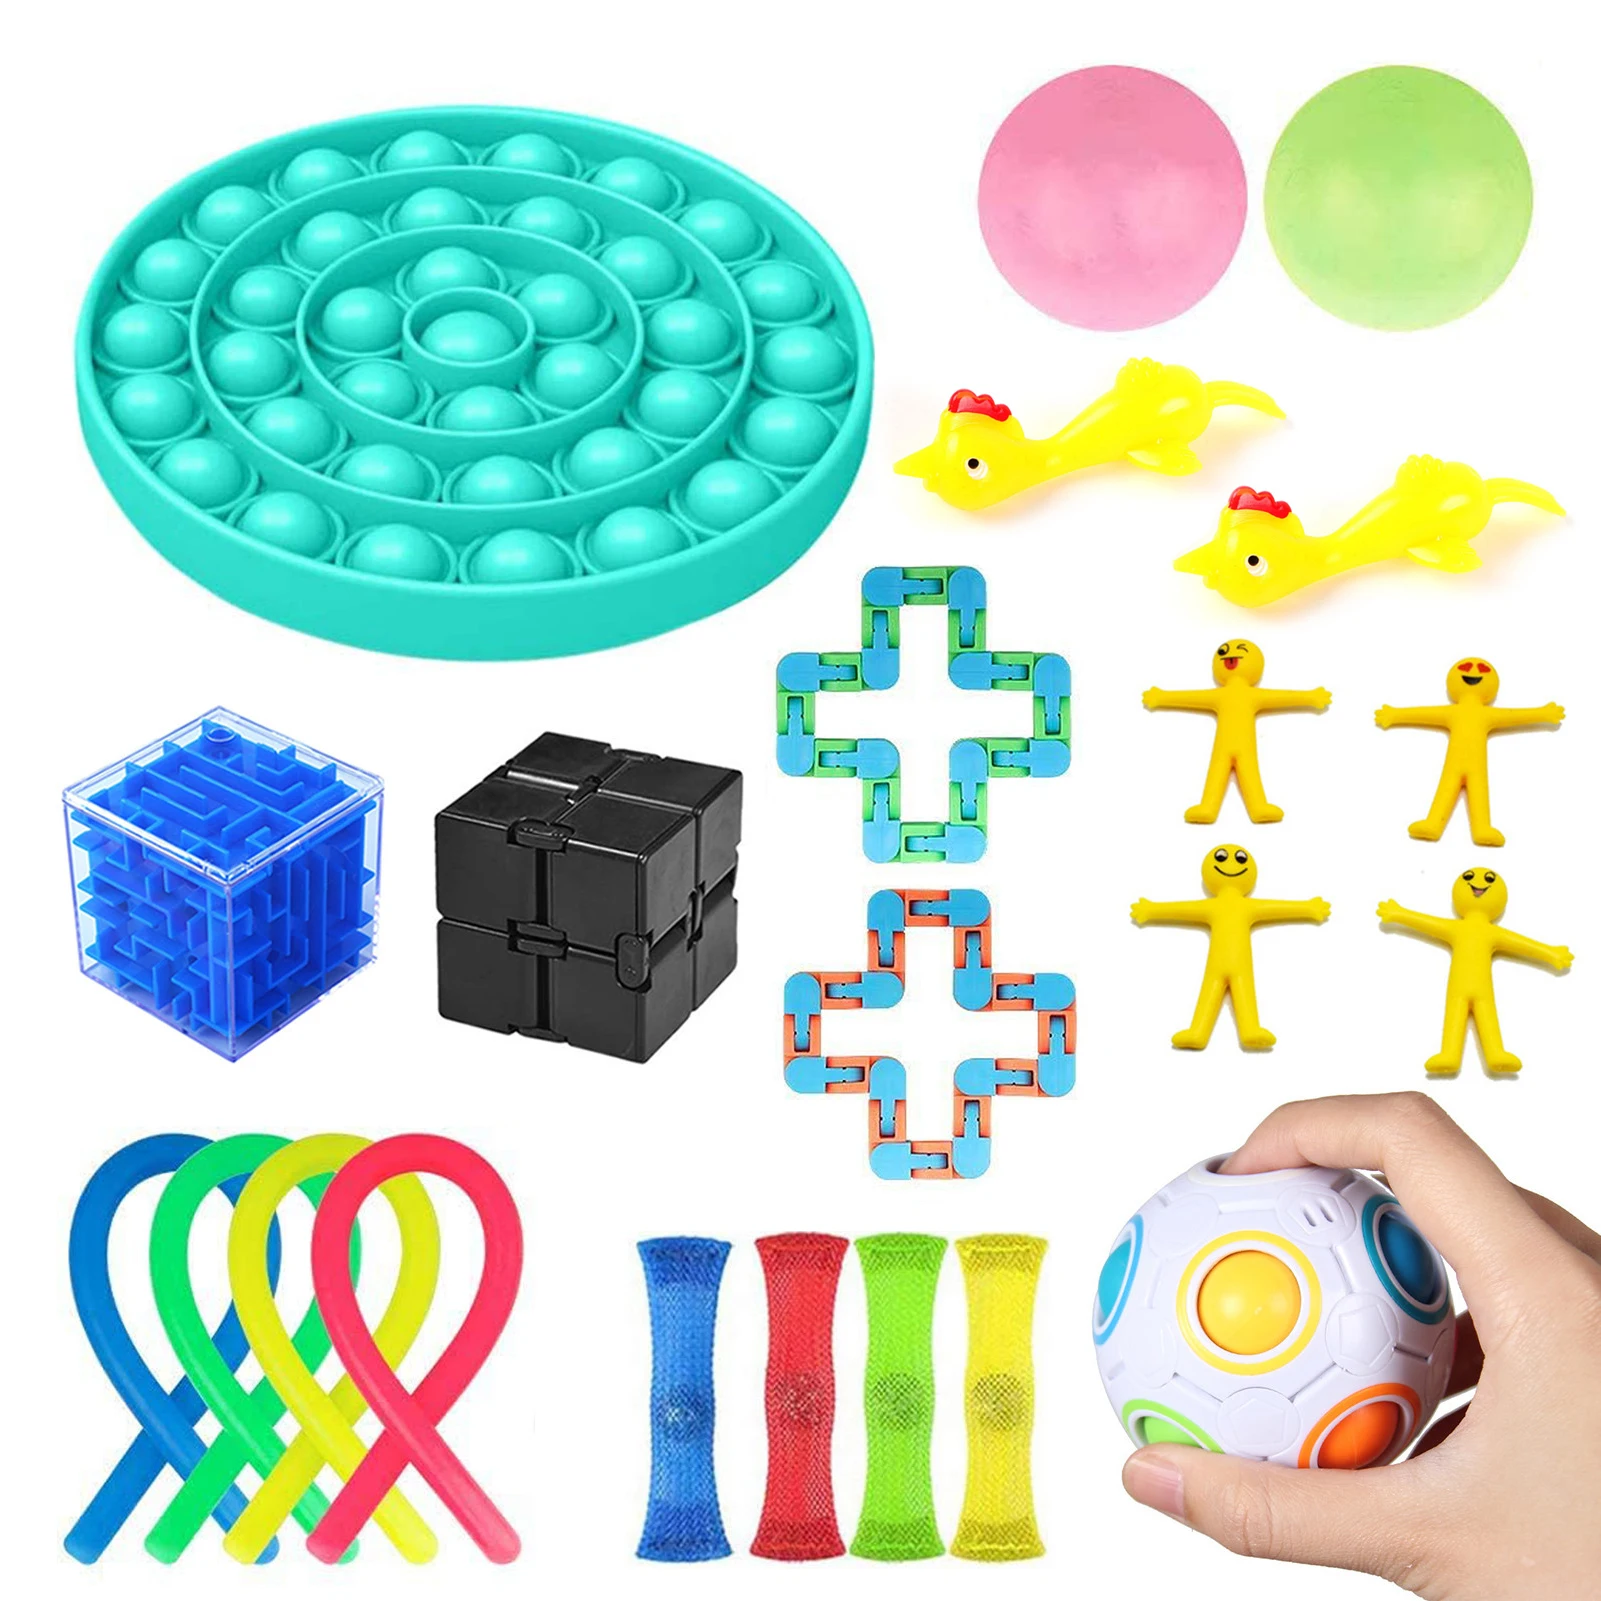 

22Pcs Sensory Toy Set Stress Reliever Calming Hand Toys for Kids Adults Girl Children Sensory Stress Relief Toys